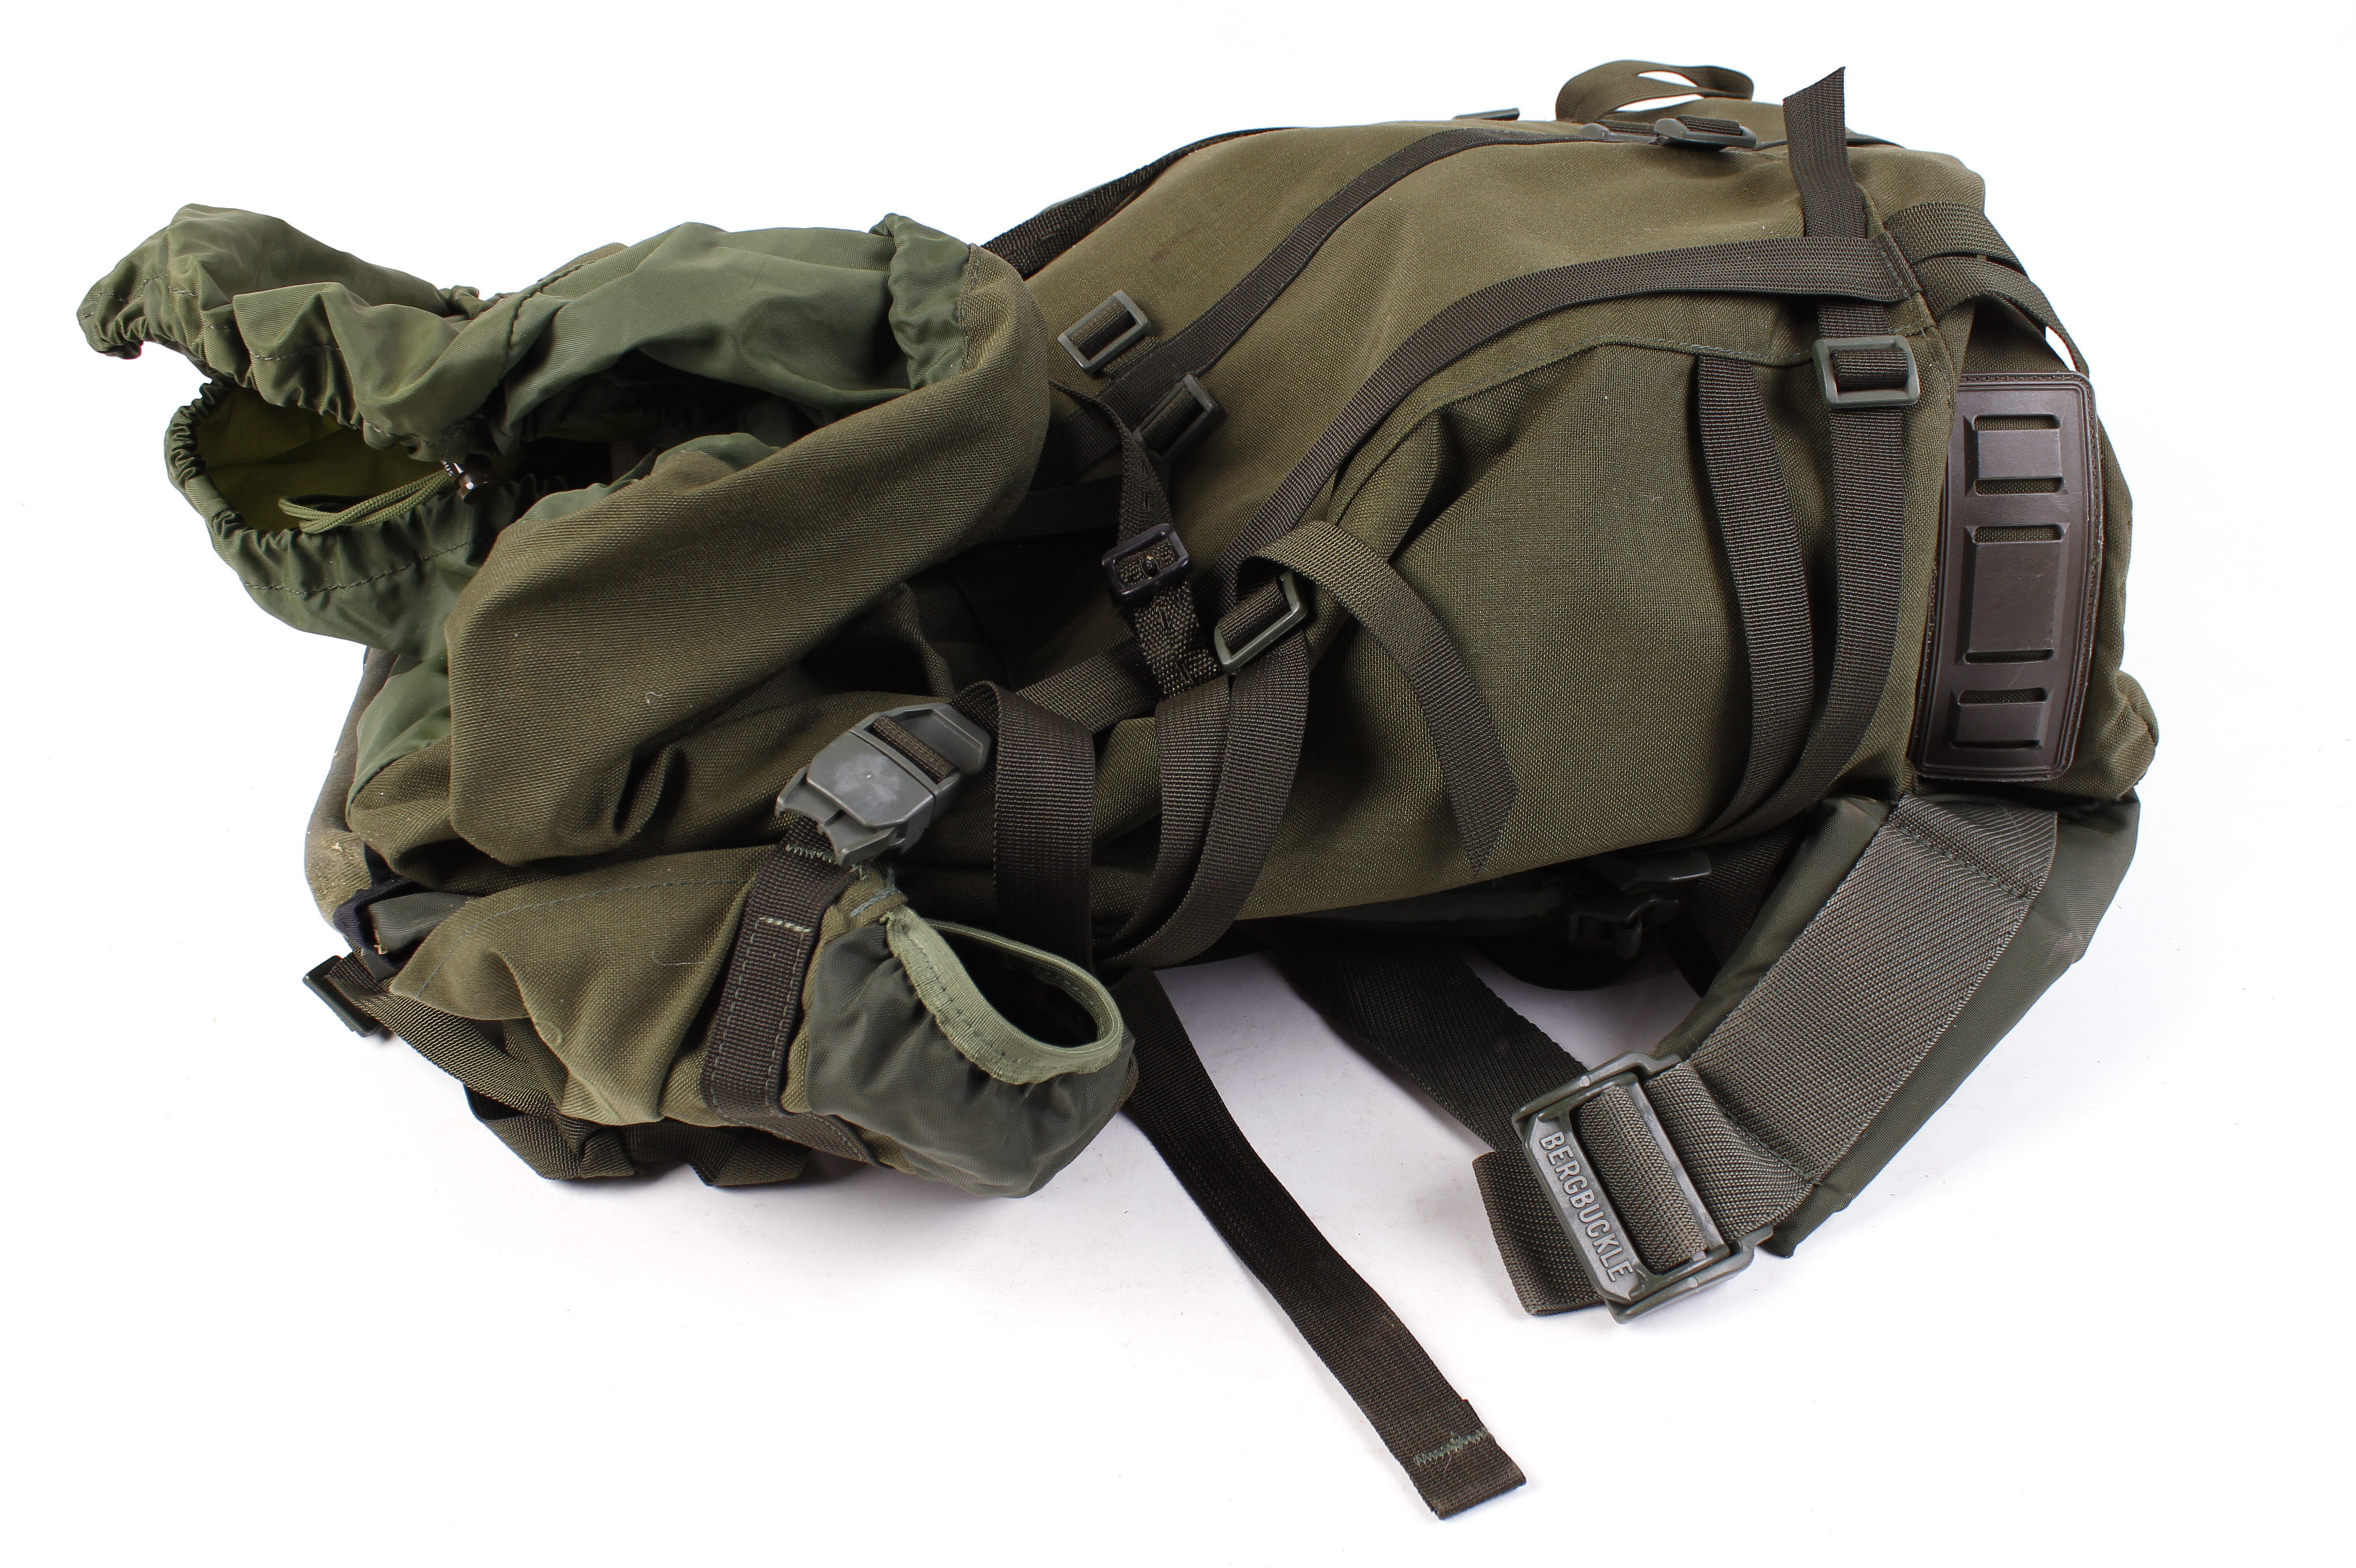 Berghaus Roc 3 army back pack containing quantity various rifle slings, cartridges belts, etc